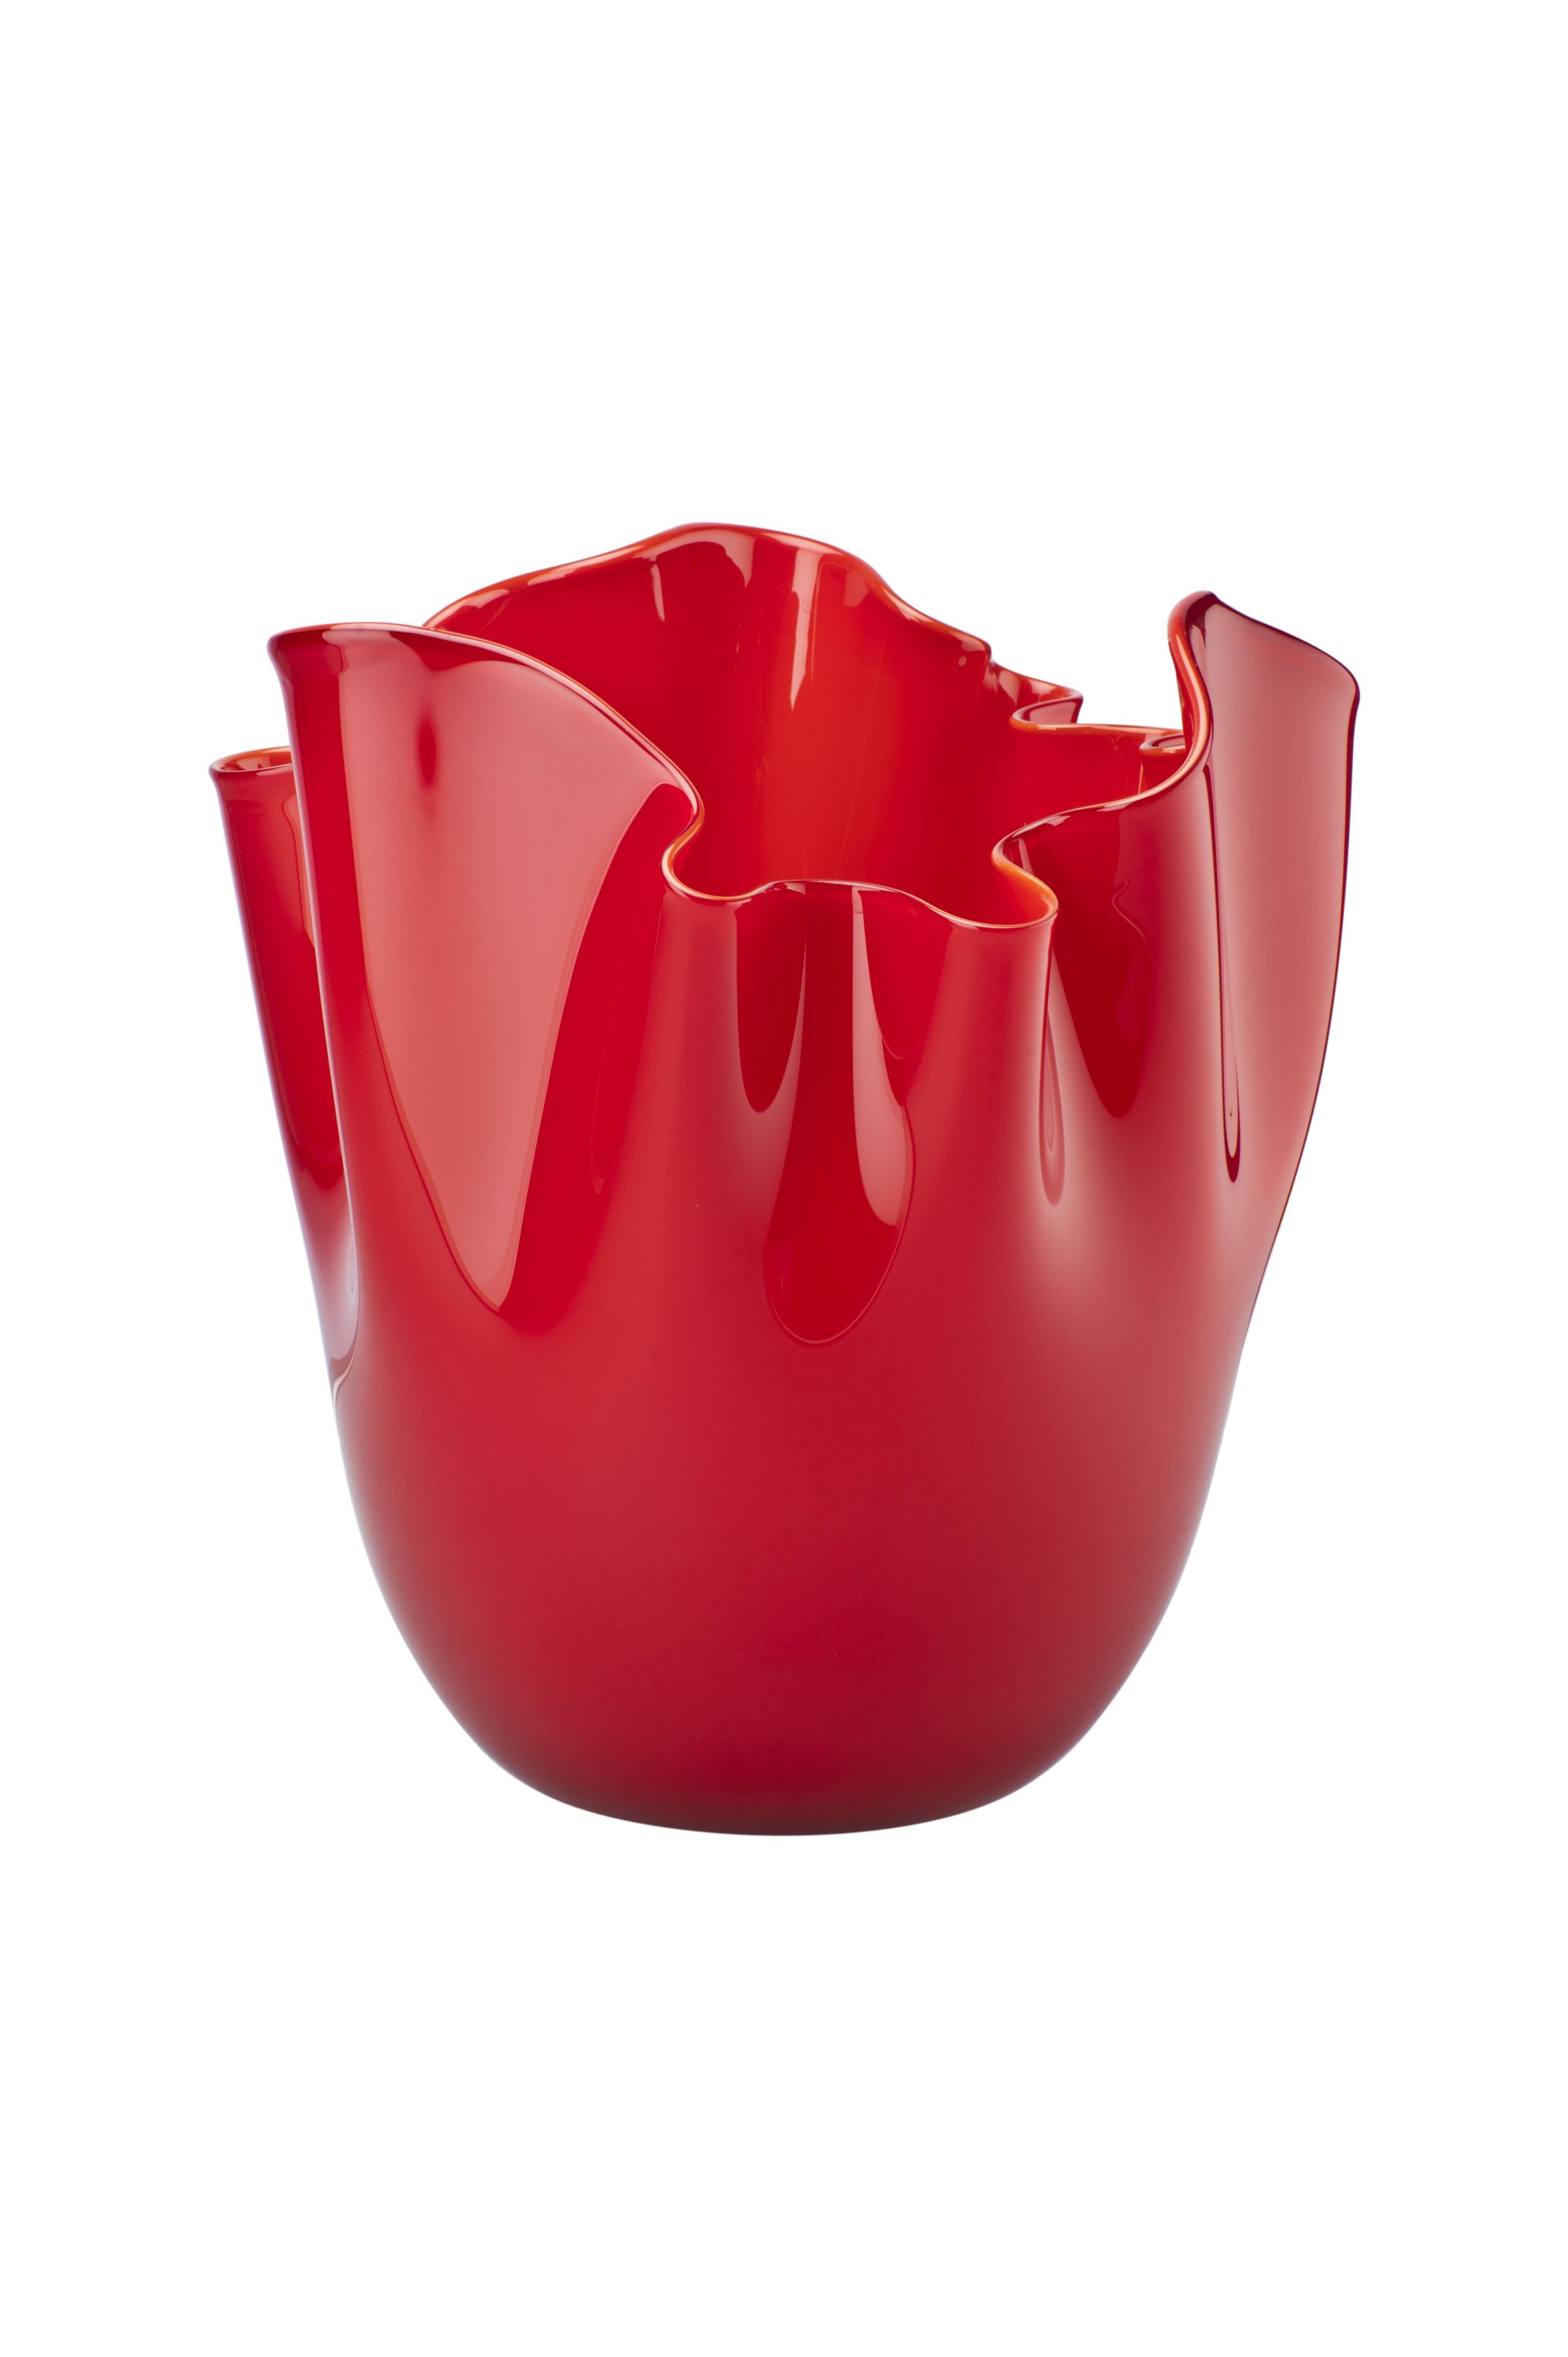 Venini glass vase with pinched rim in red designed by Fulvio Bianconi and Paolo Venini in 1948. Perfect for indoor home decor as container, vide-poche or statement piece for any room. Also available in other colors on 1stdibs.

Dimensions: 20 cm